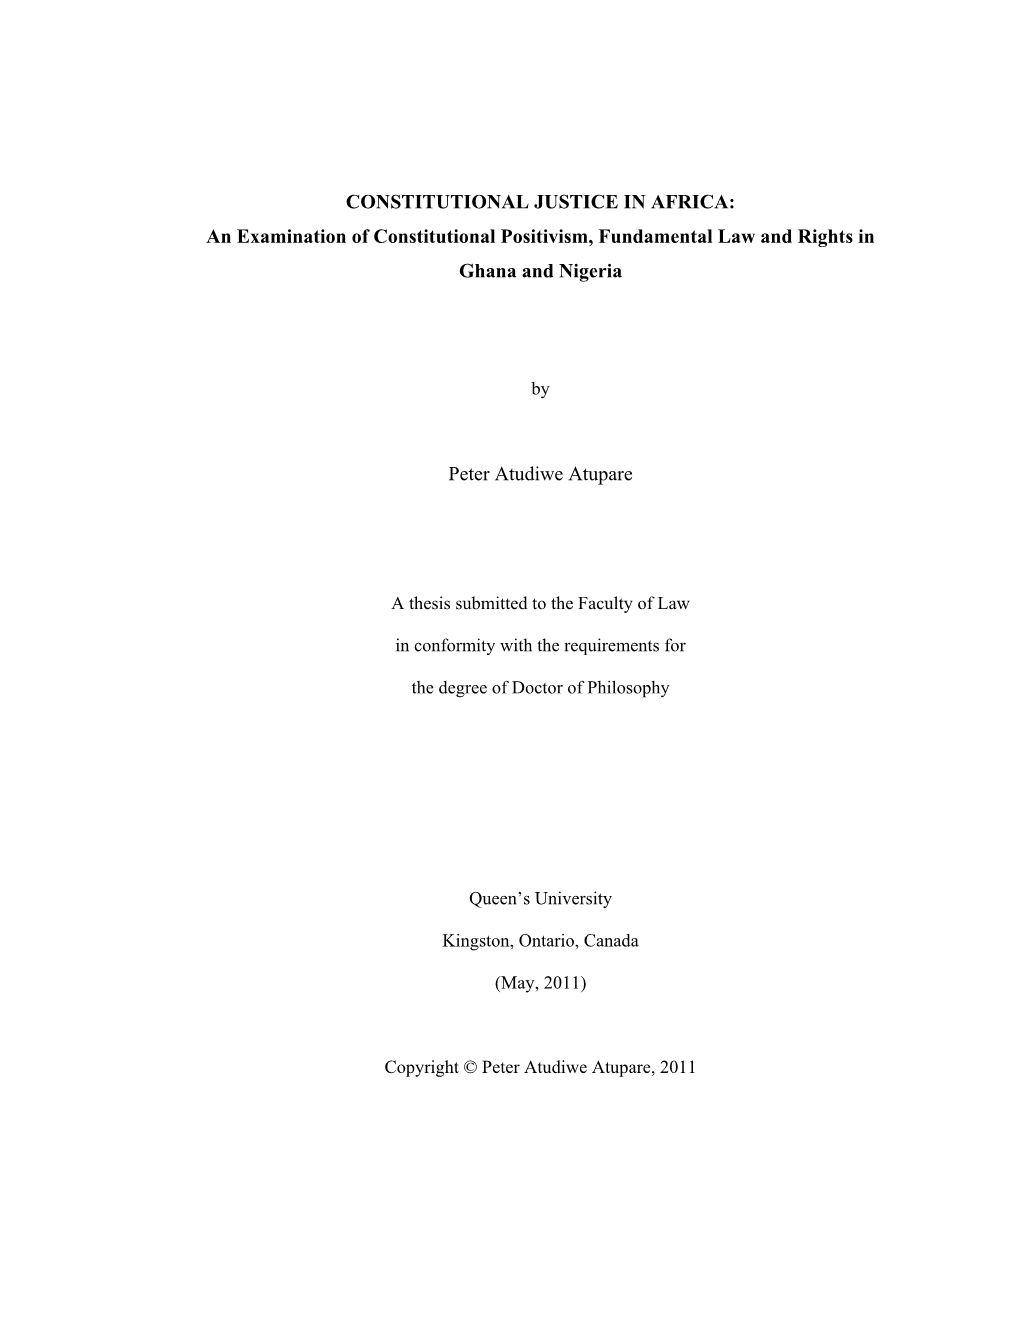 CONSTITUTIONAL JUSTICE in AFRICA: an Examination of Constitutional Positivism, Fundamental Law and Rights in Ghana and Nigeria